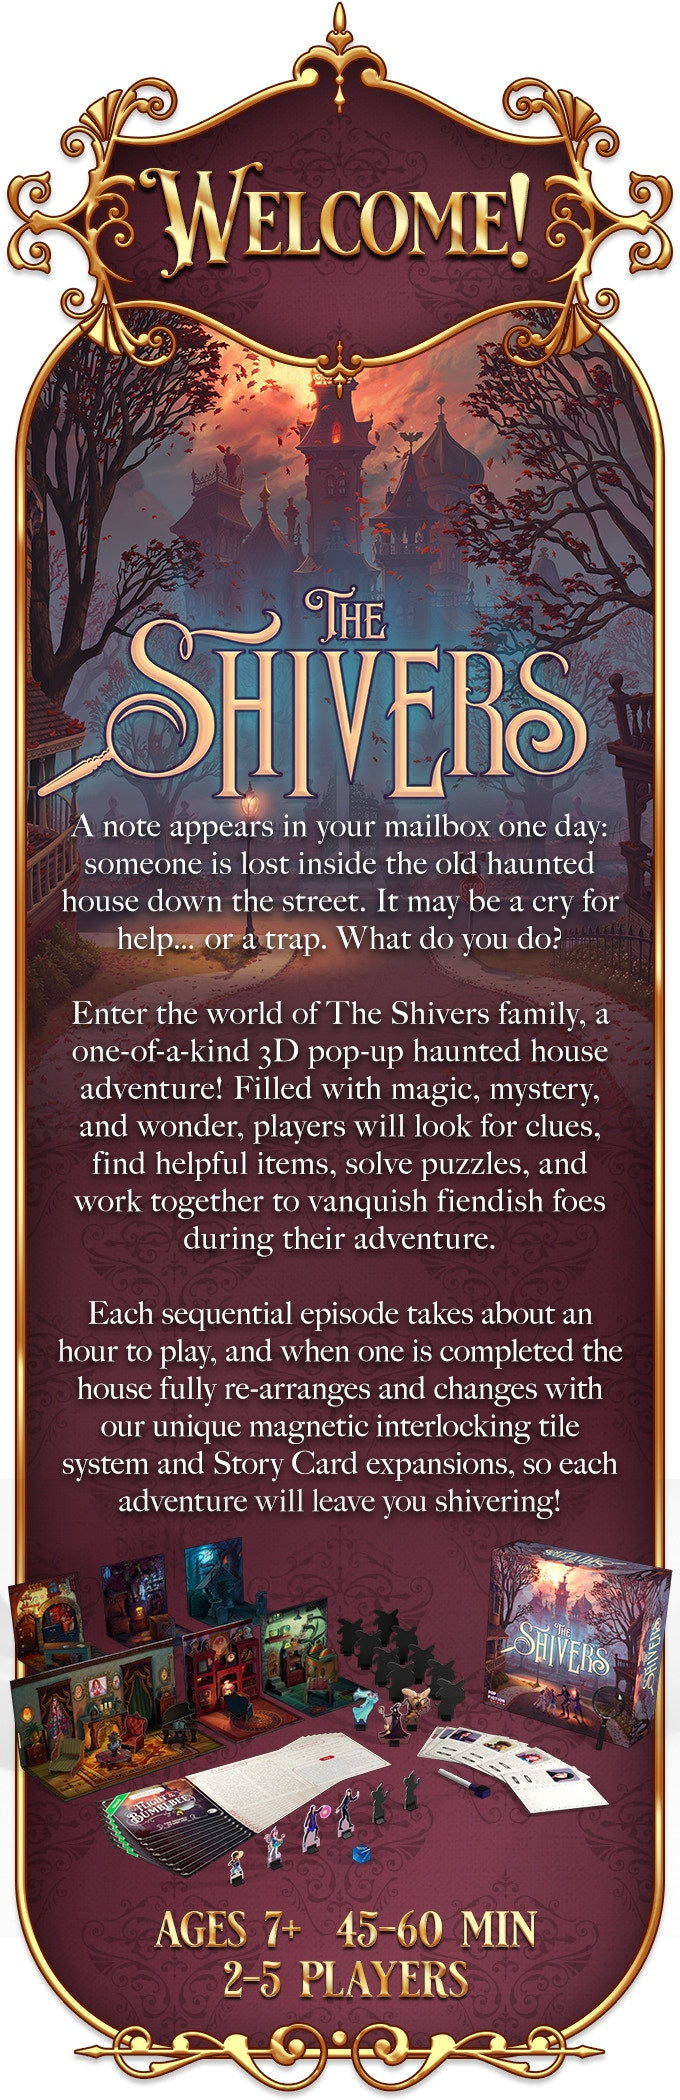 The Shivers Pop-Up Table-Top Adventure Game - Deluxe Edition